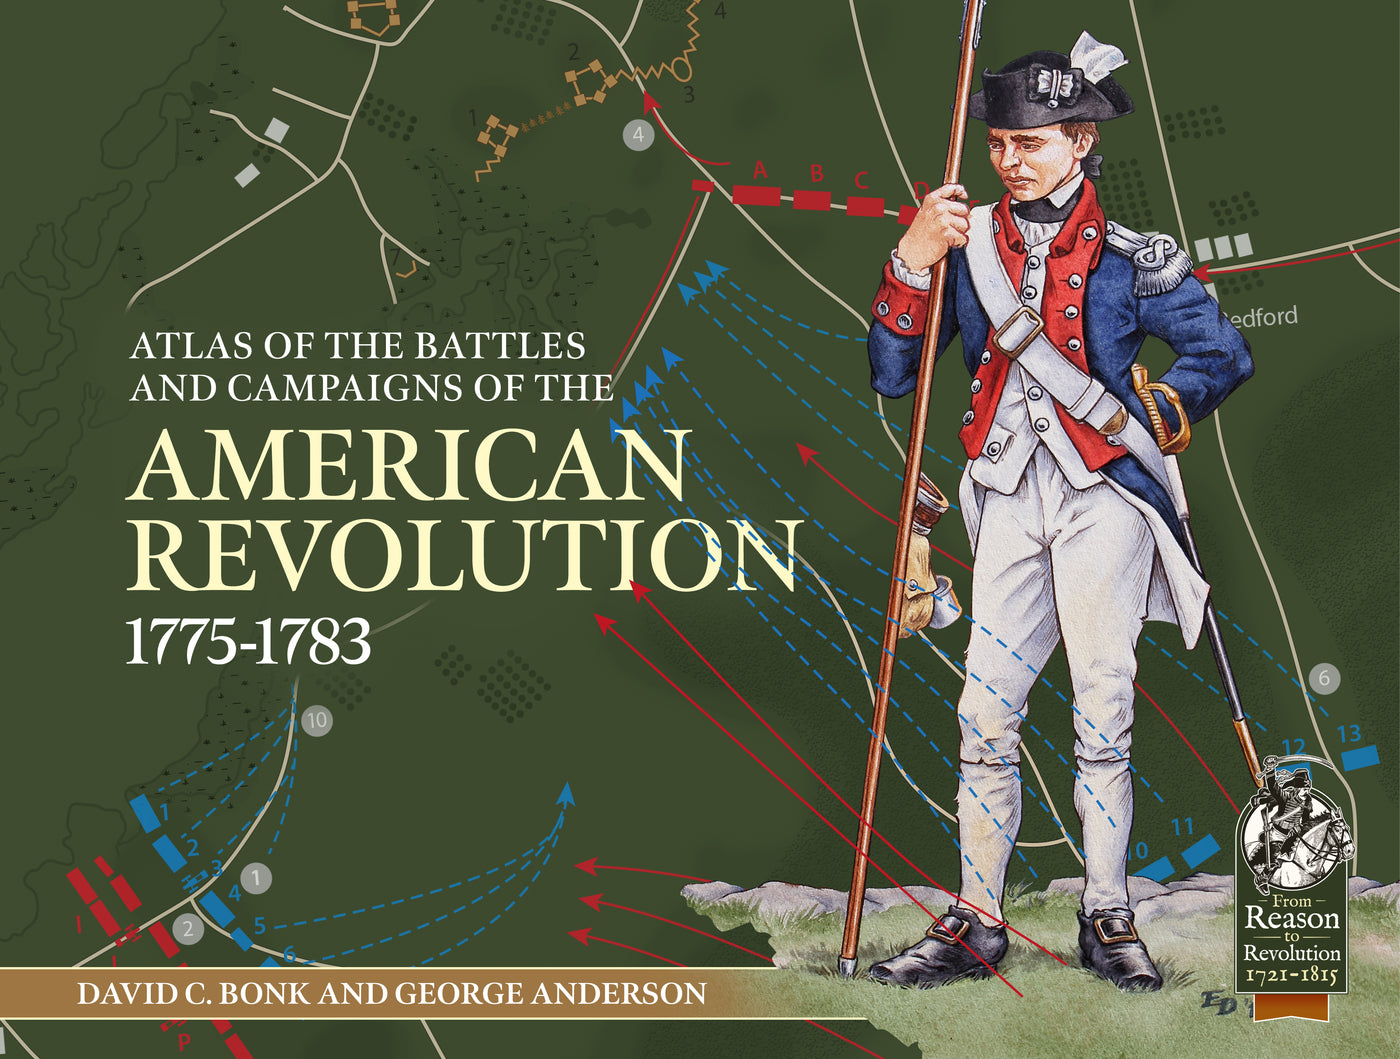 An Atlas of the Battles and Campaigns of the American Revolution, 1775-1783